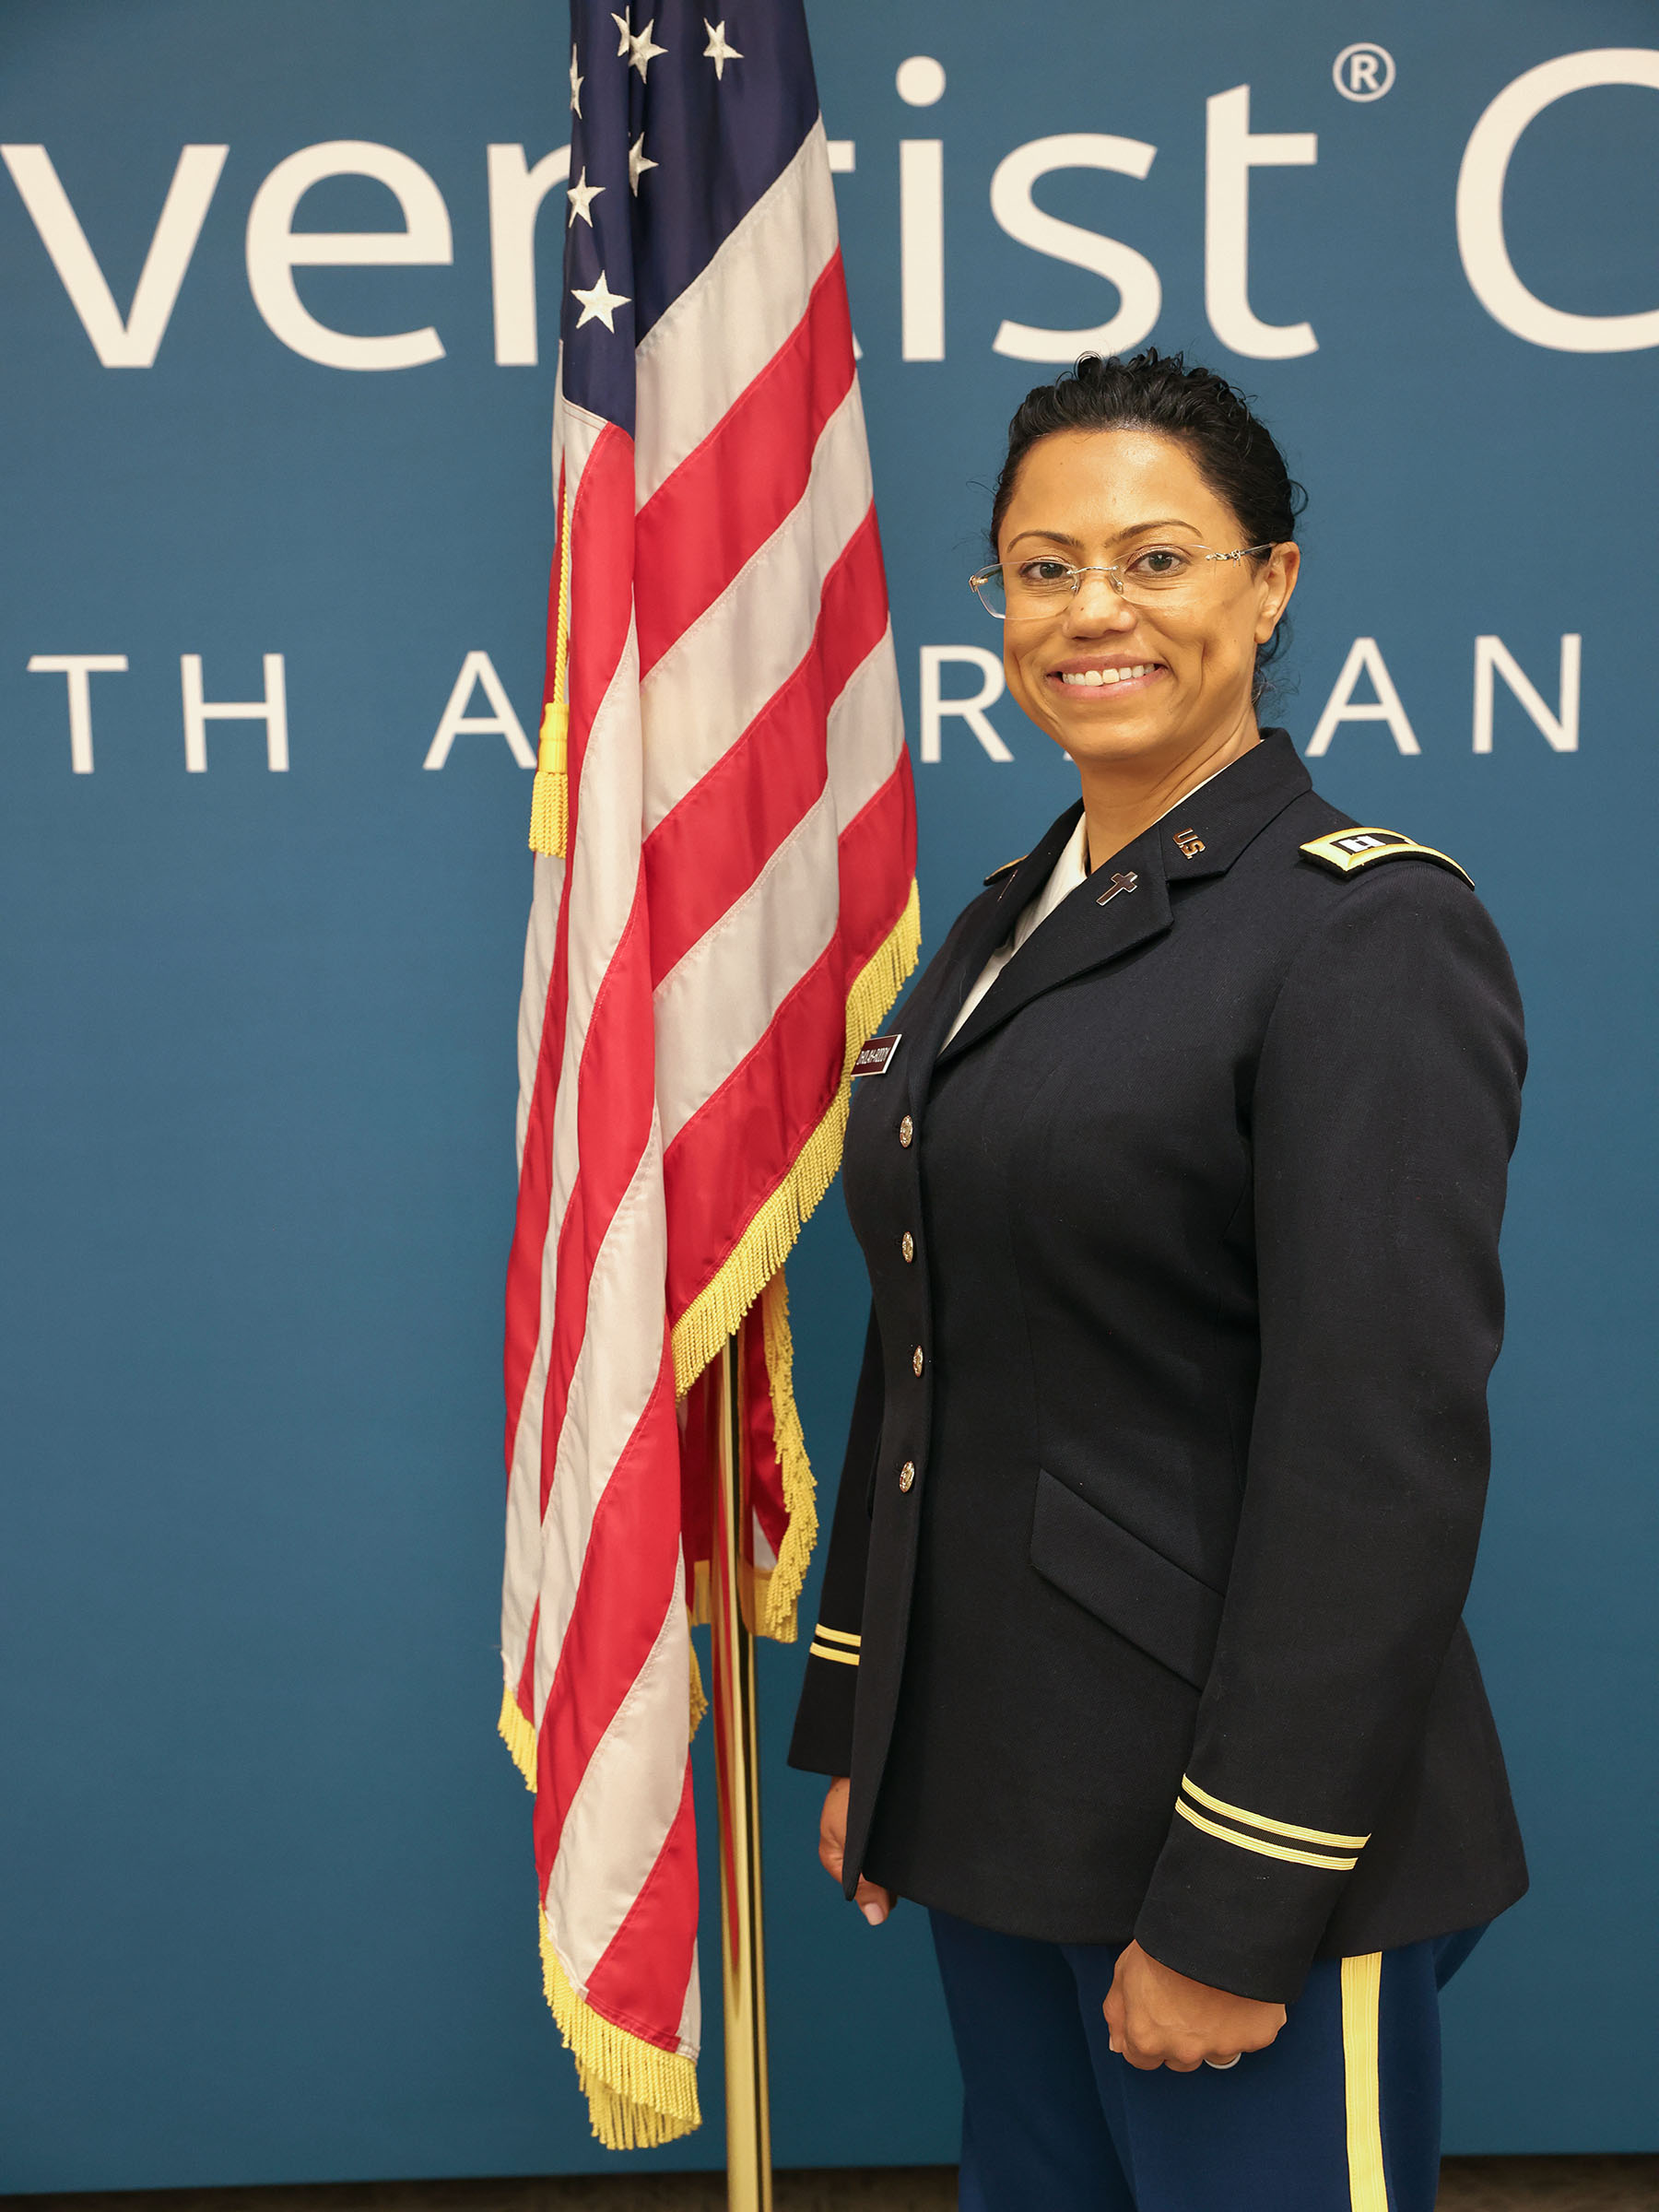 Woman in military uniform smiling as she stands next to the American flag.